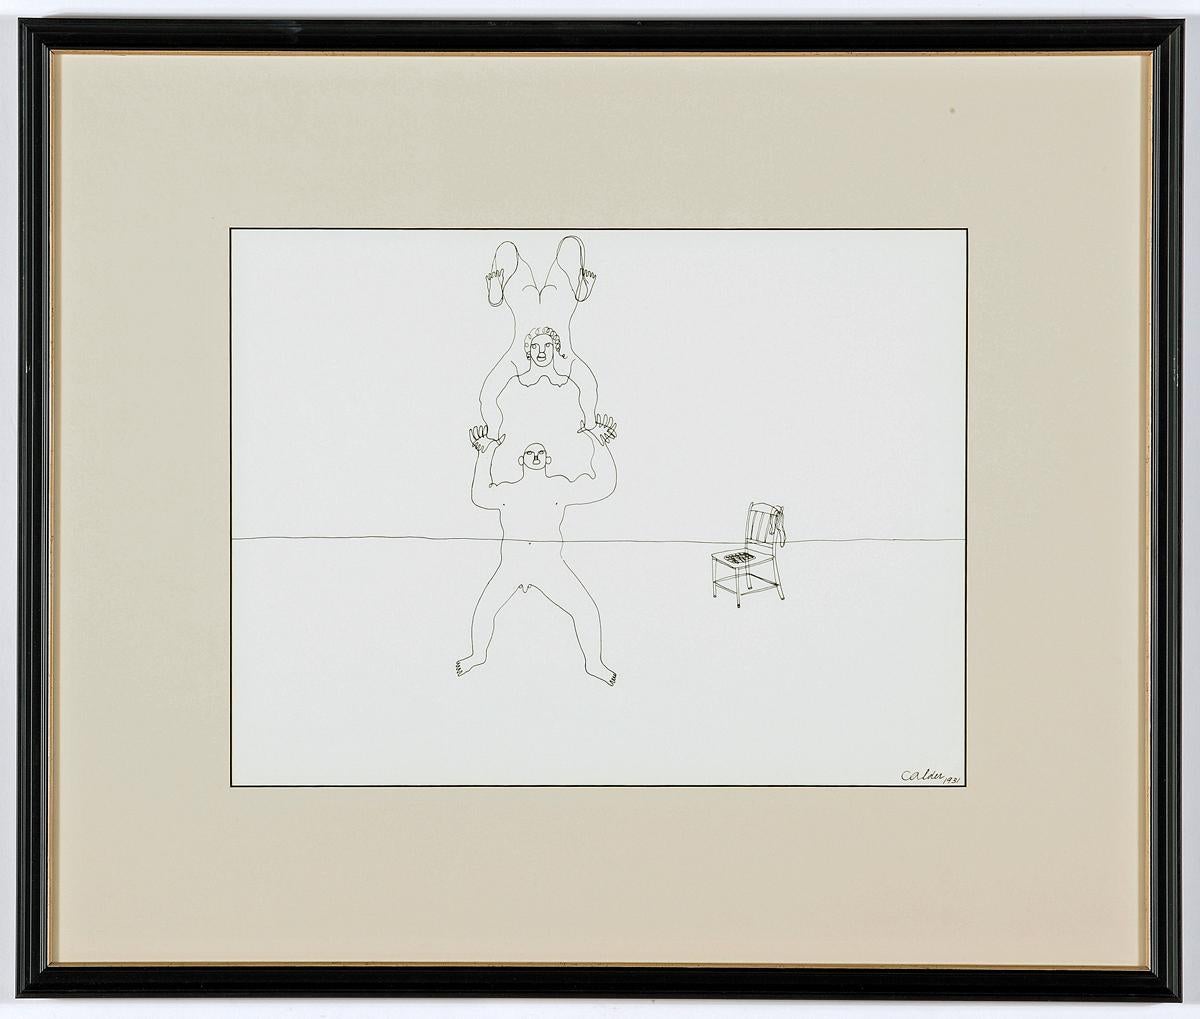 Calder Circus, complete Set of 16 lithographs after the original drawings 8